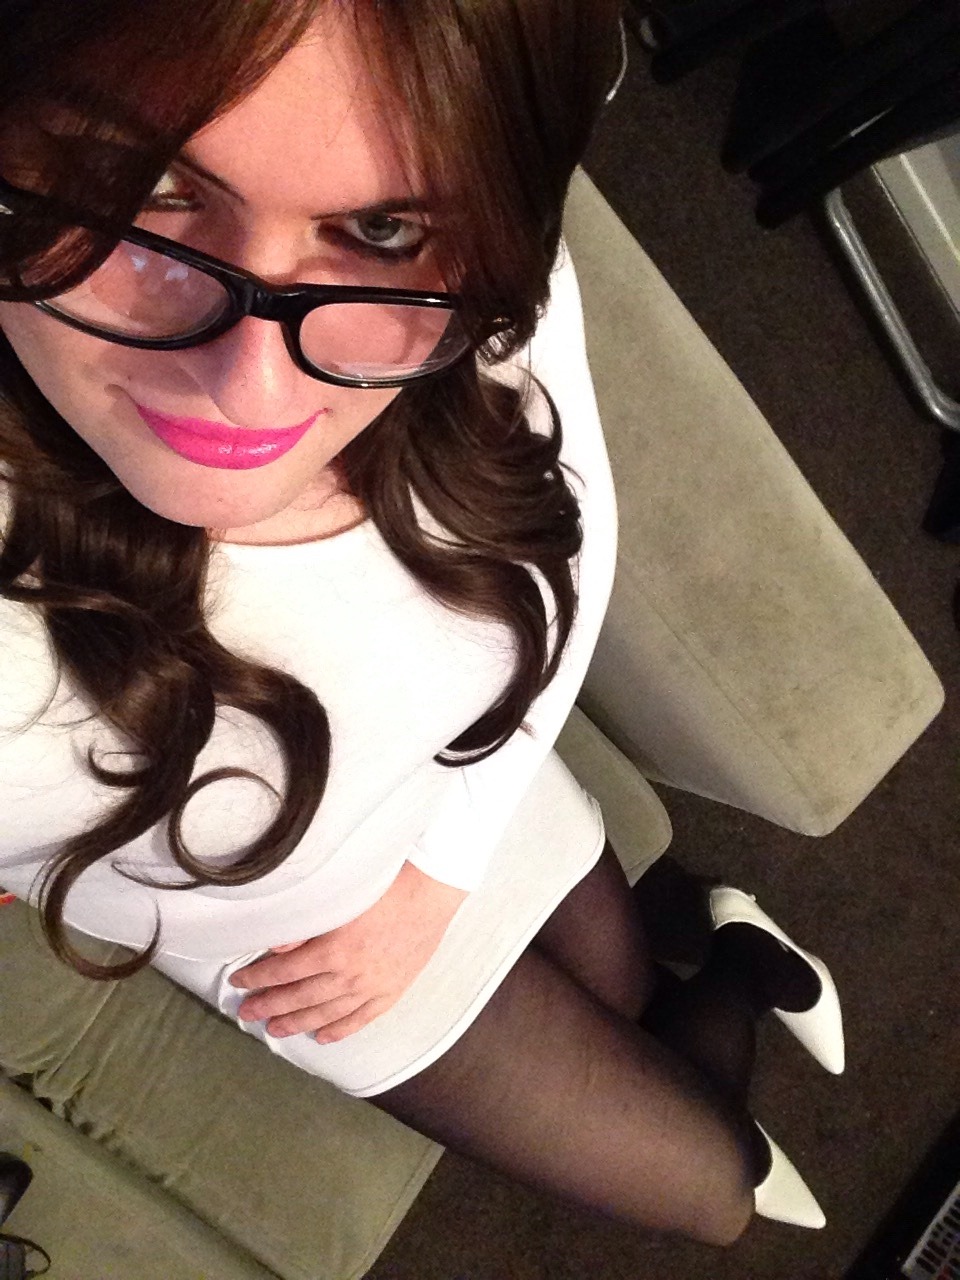 steph-cox-cd:  Saucy secretary is back! 🤓 office hours are open again 💁🏻